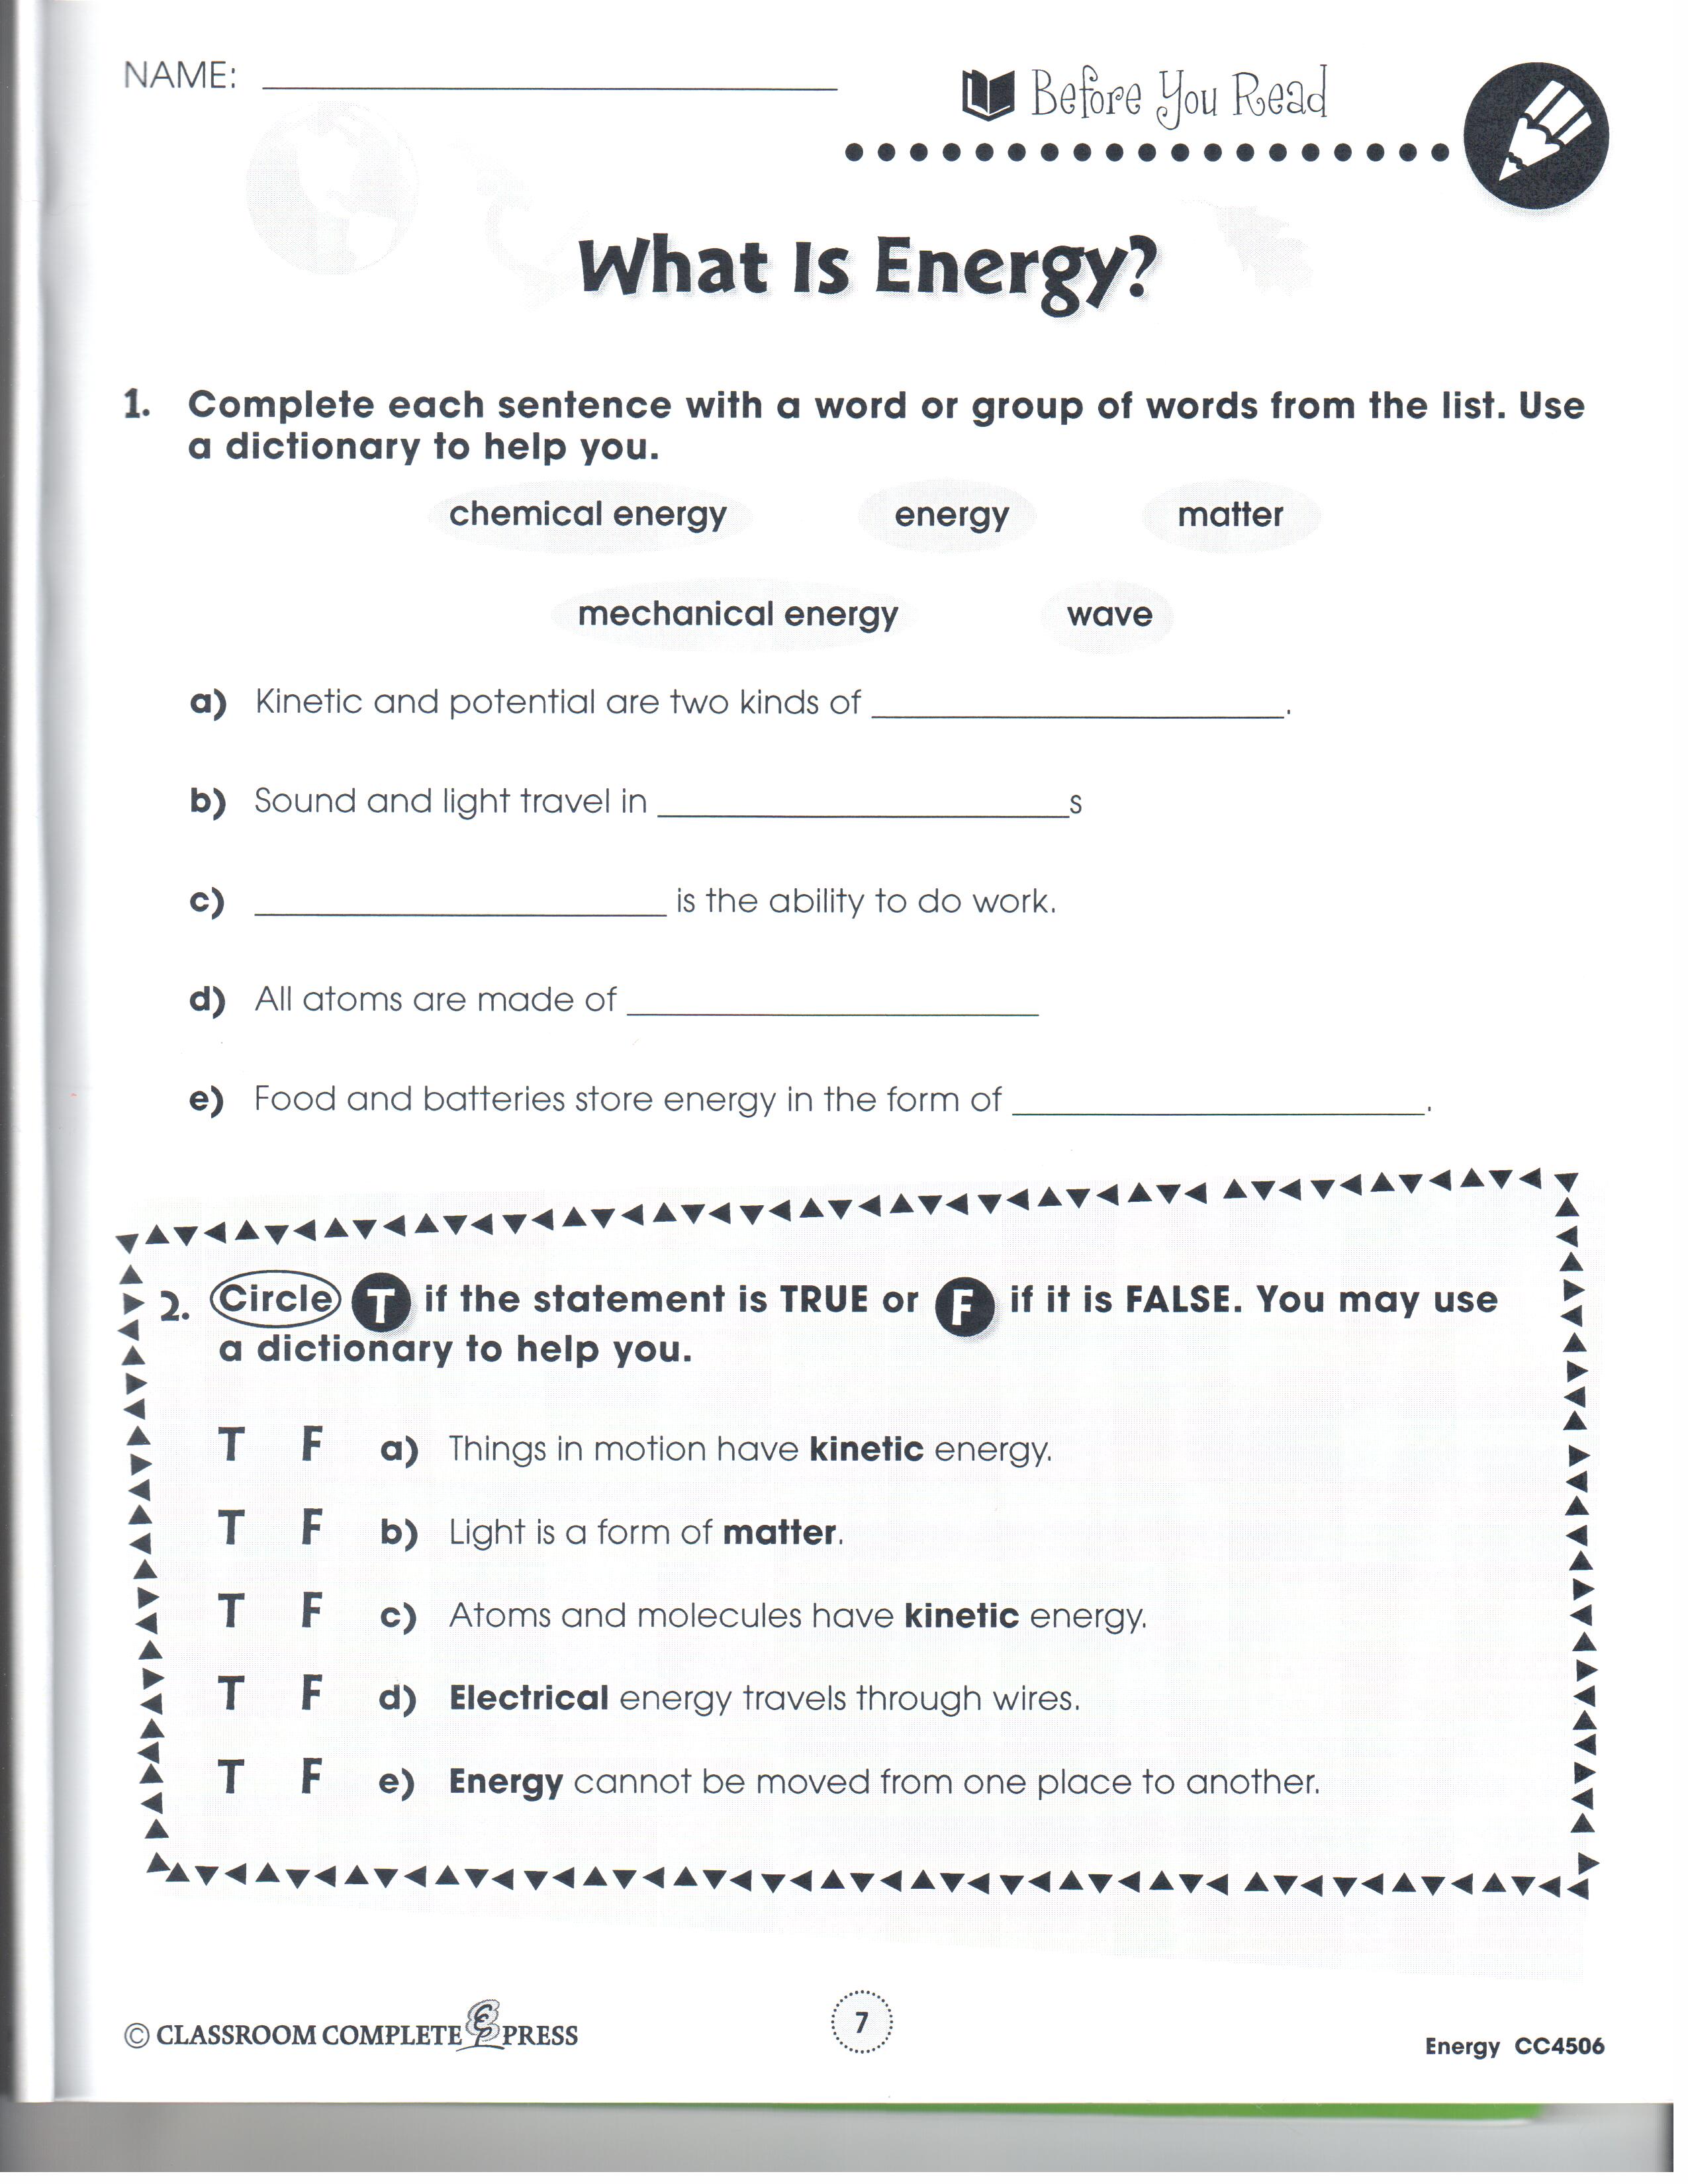 Printables Kinetic And Potential Energy Worksheet printables energy worksheet answers safarmediapps worksheets potential pichaglobal kinetic vs worksheet